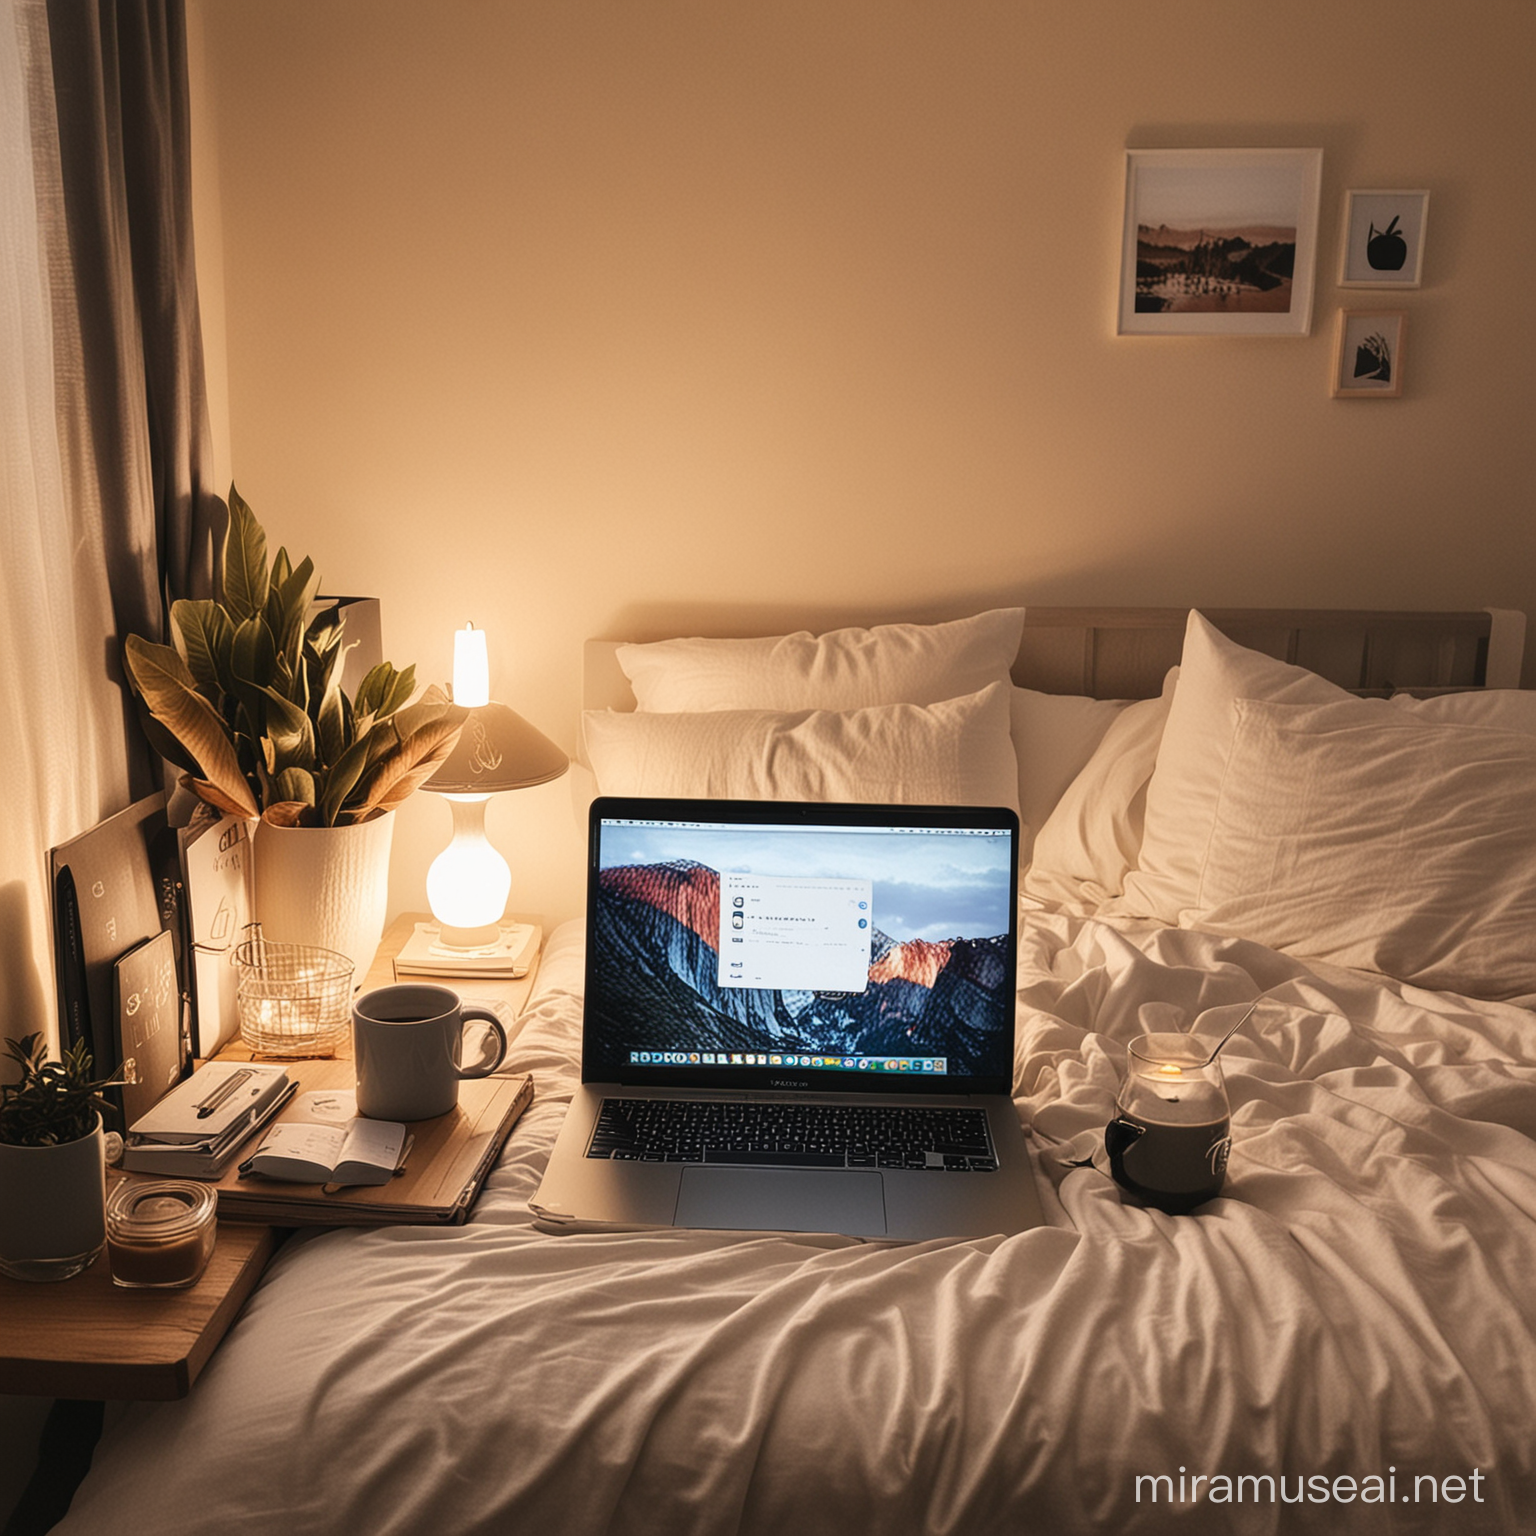 Picture a cozy bedroom with a laptop and takeout containers.